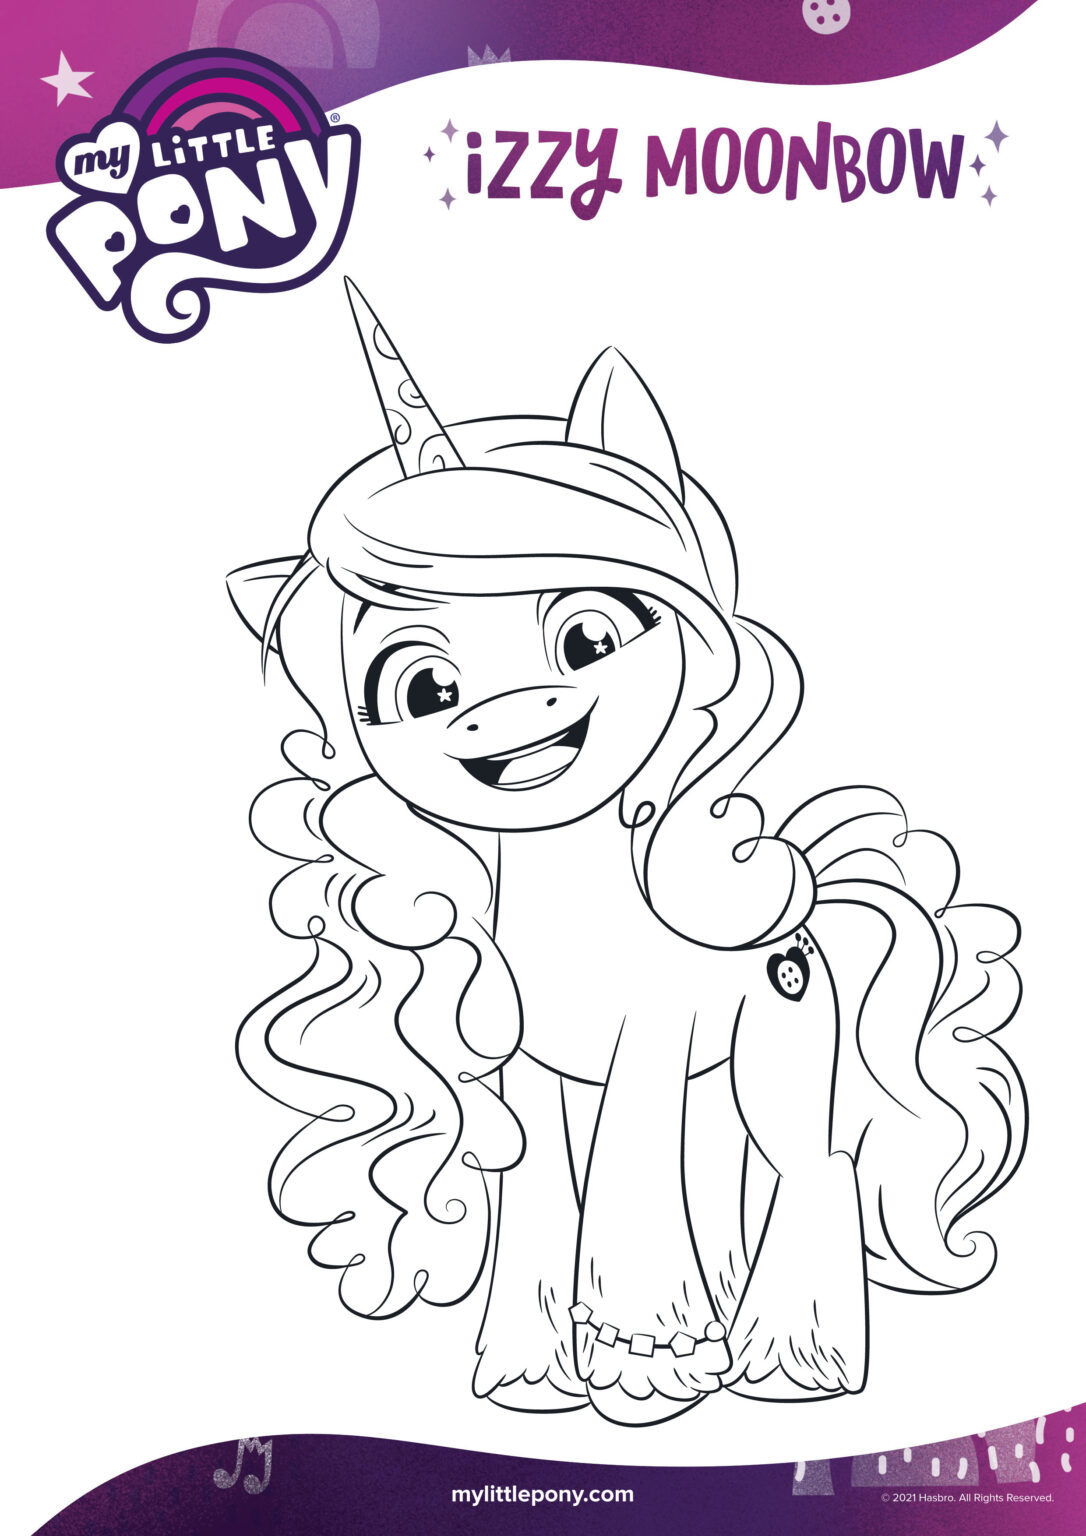 My Little Pony A New Generation Izzy Moonbow Coloring Pages - Cartoon